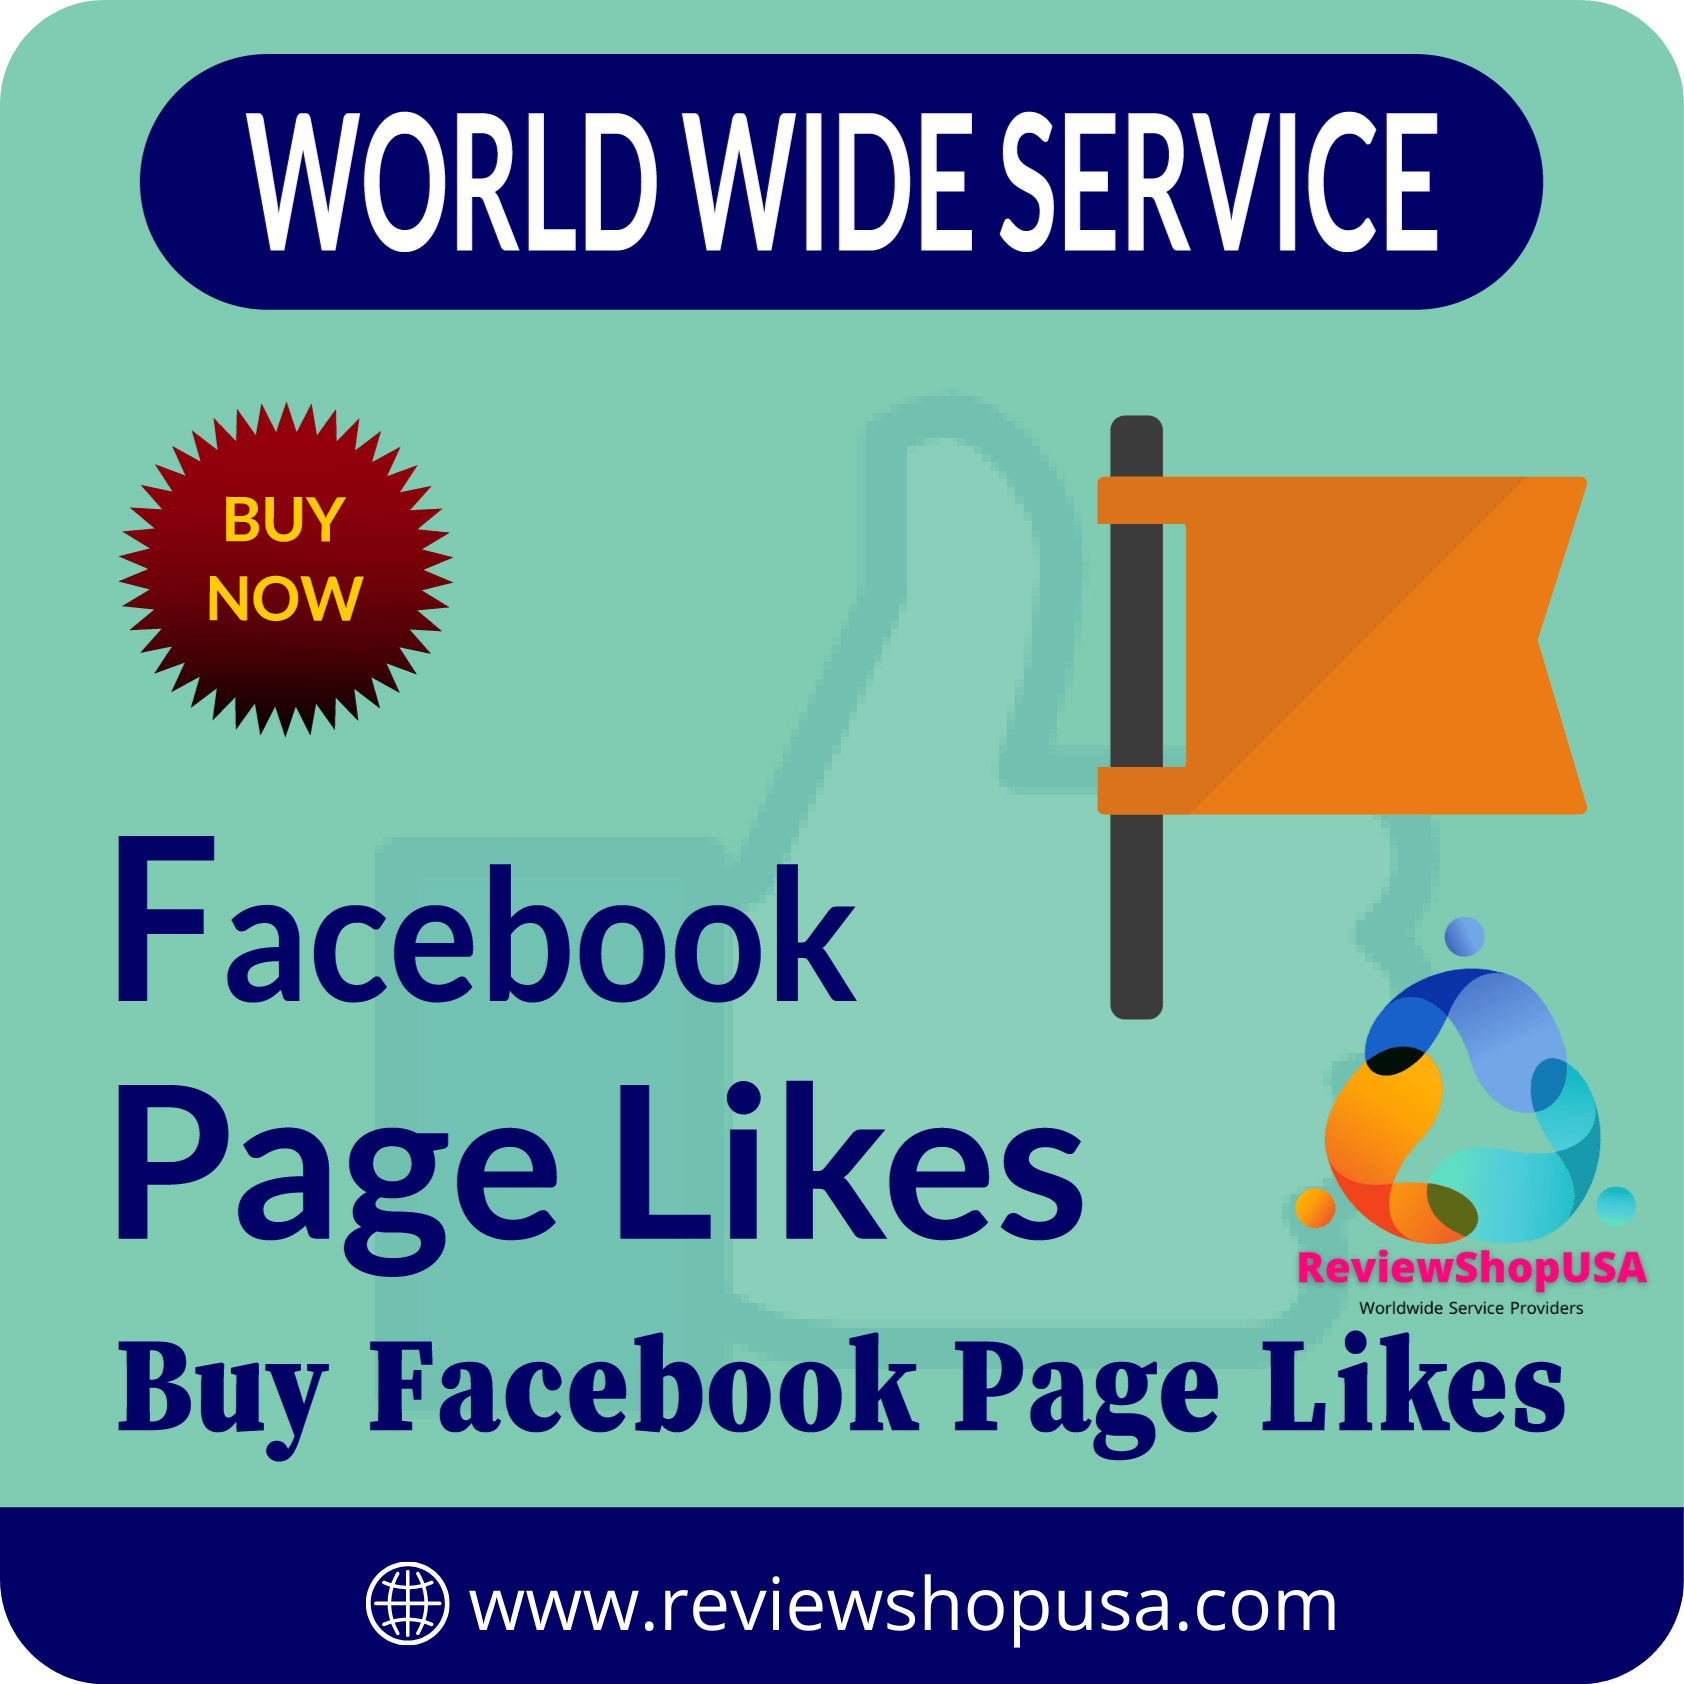 Buy Facebook Page Likes - Buy {Global} Facebook Accounts Page Likes...